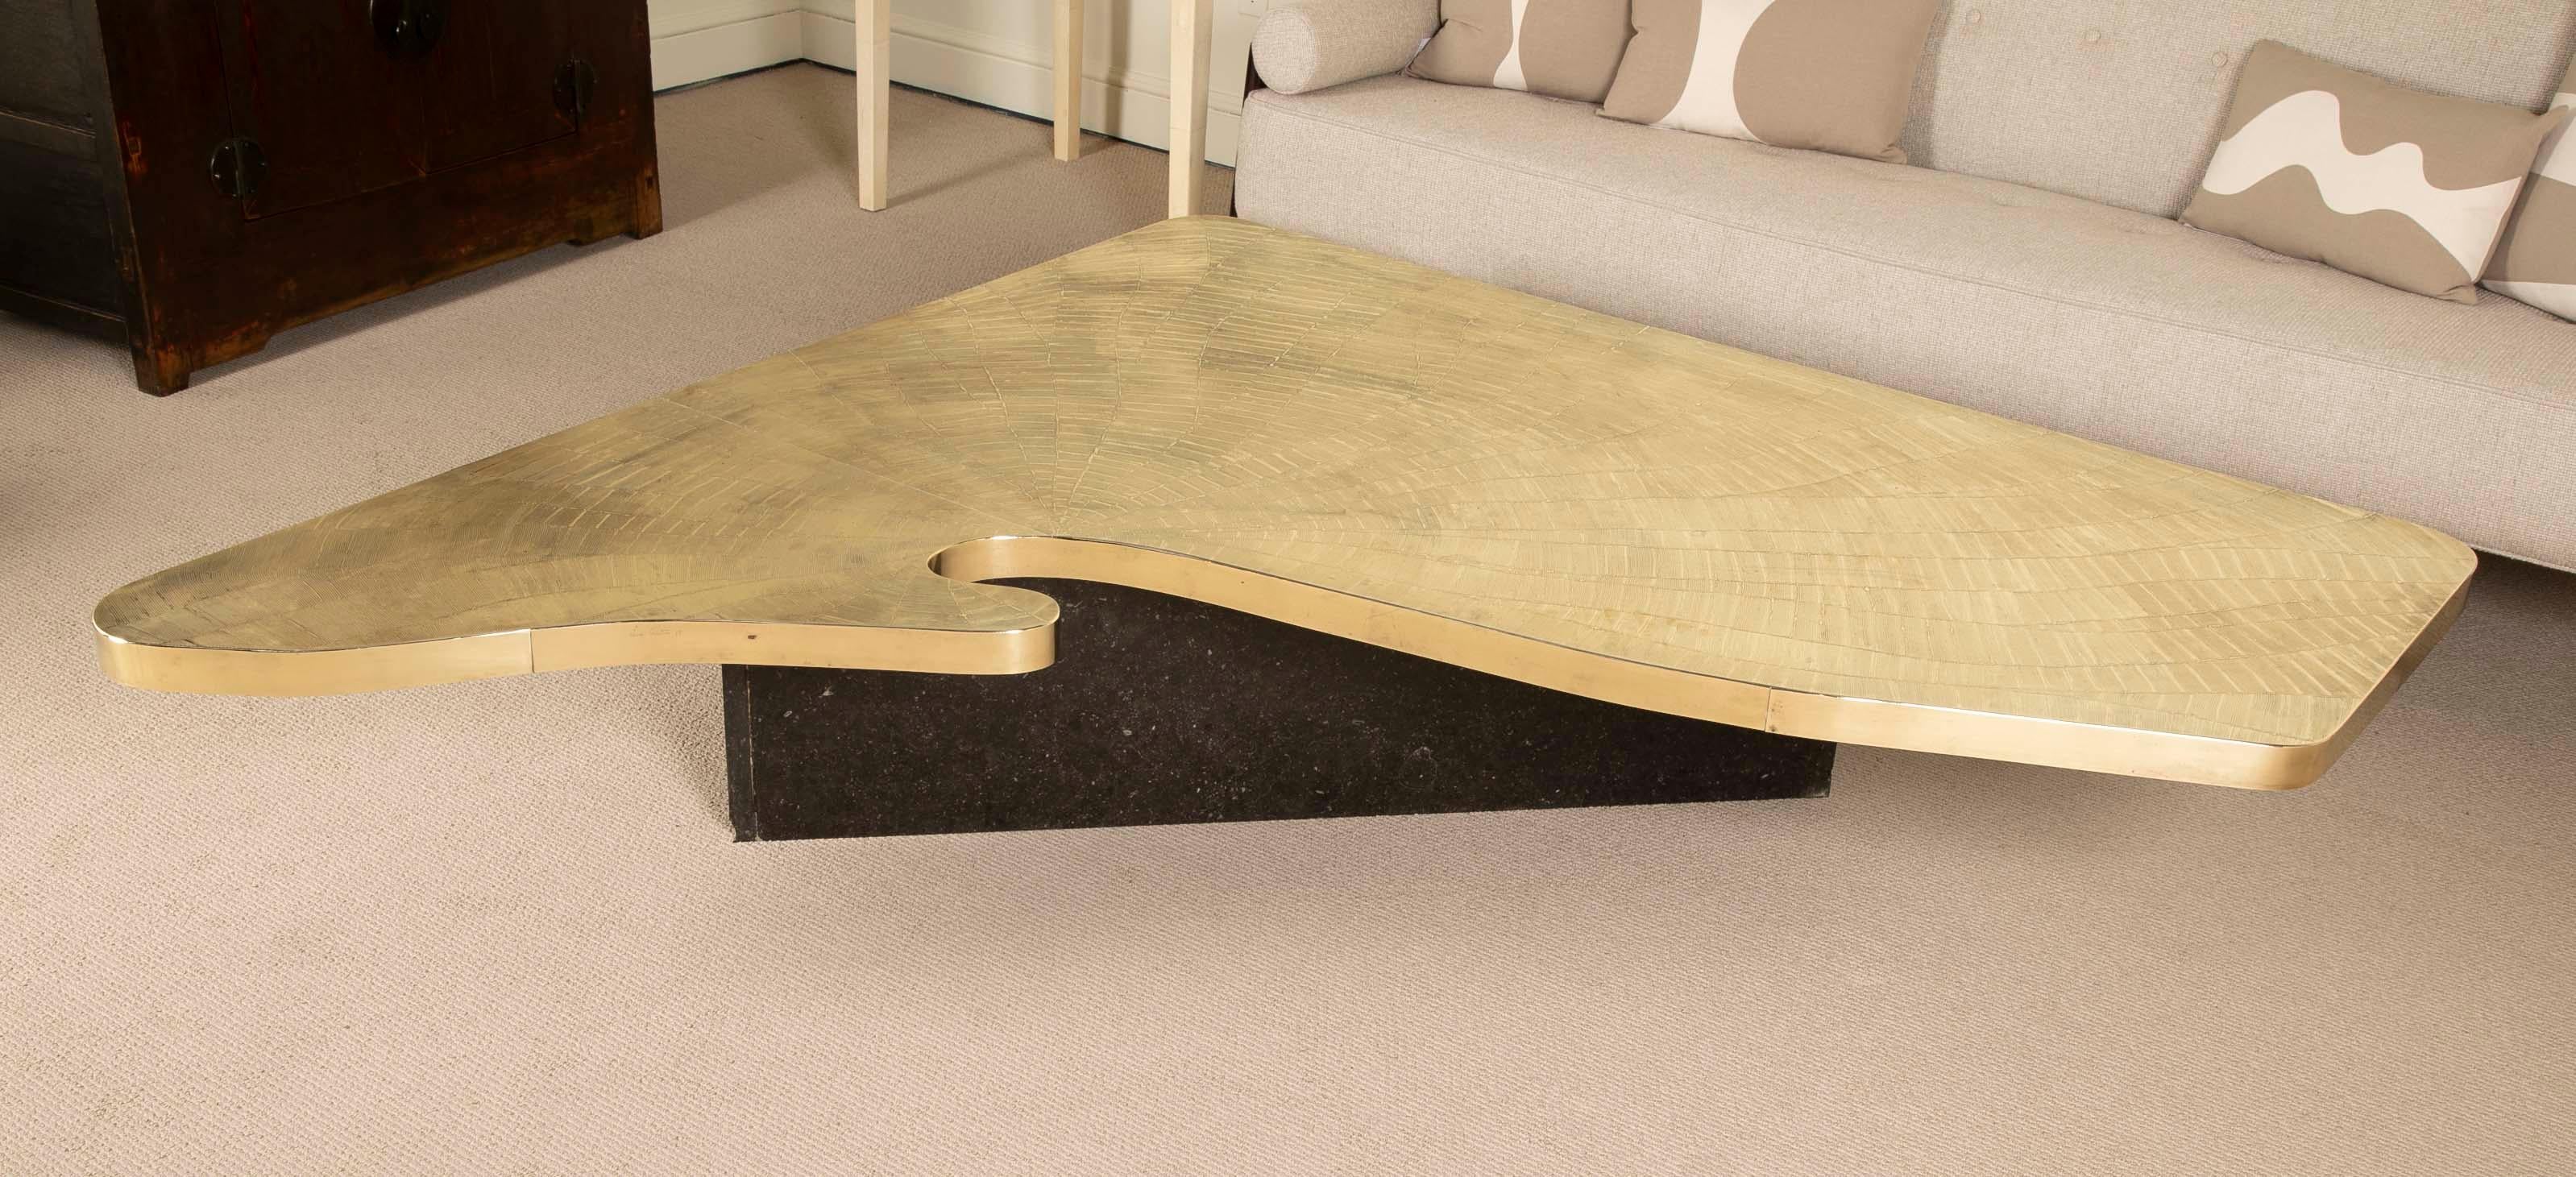 Custom Designed Etched Brass Coffee Table by Lova Creations 1